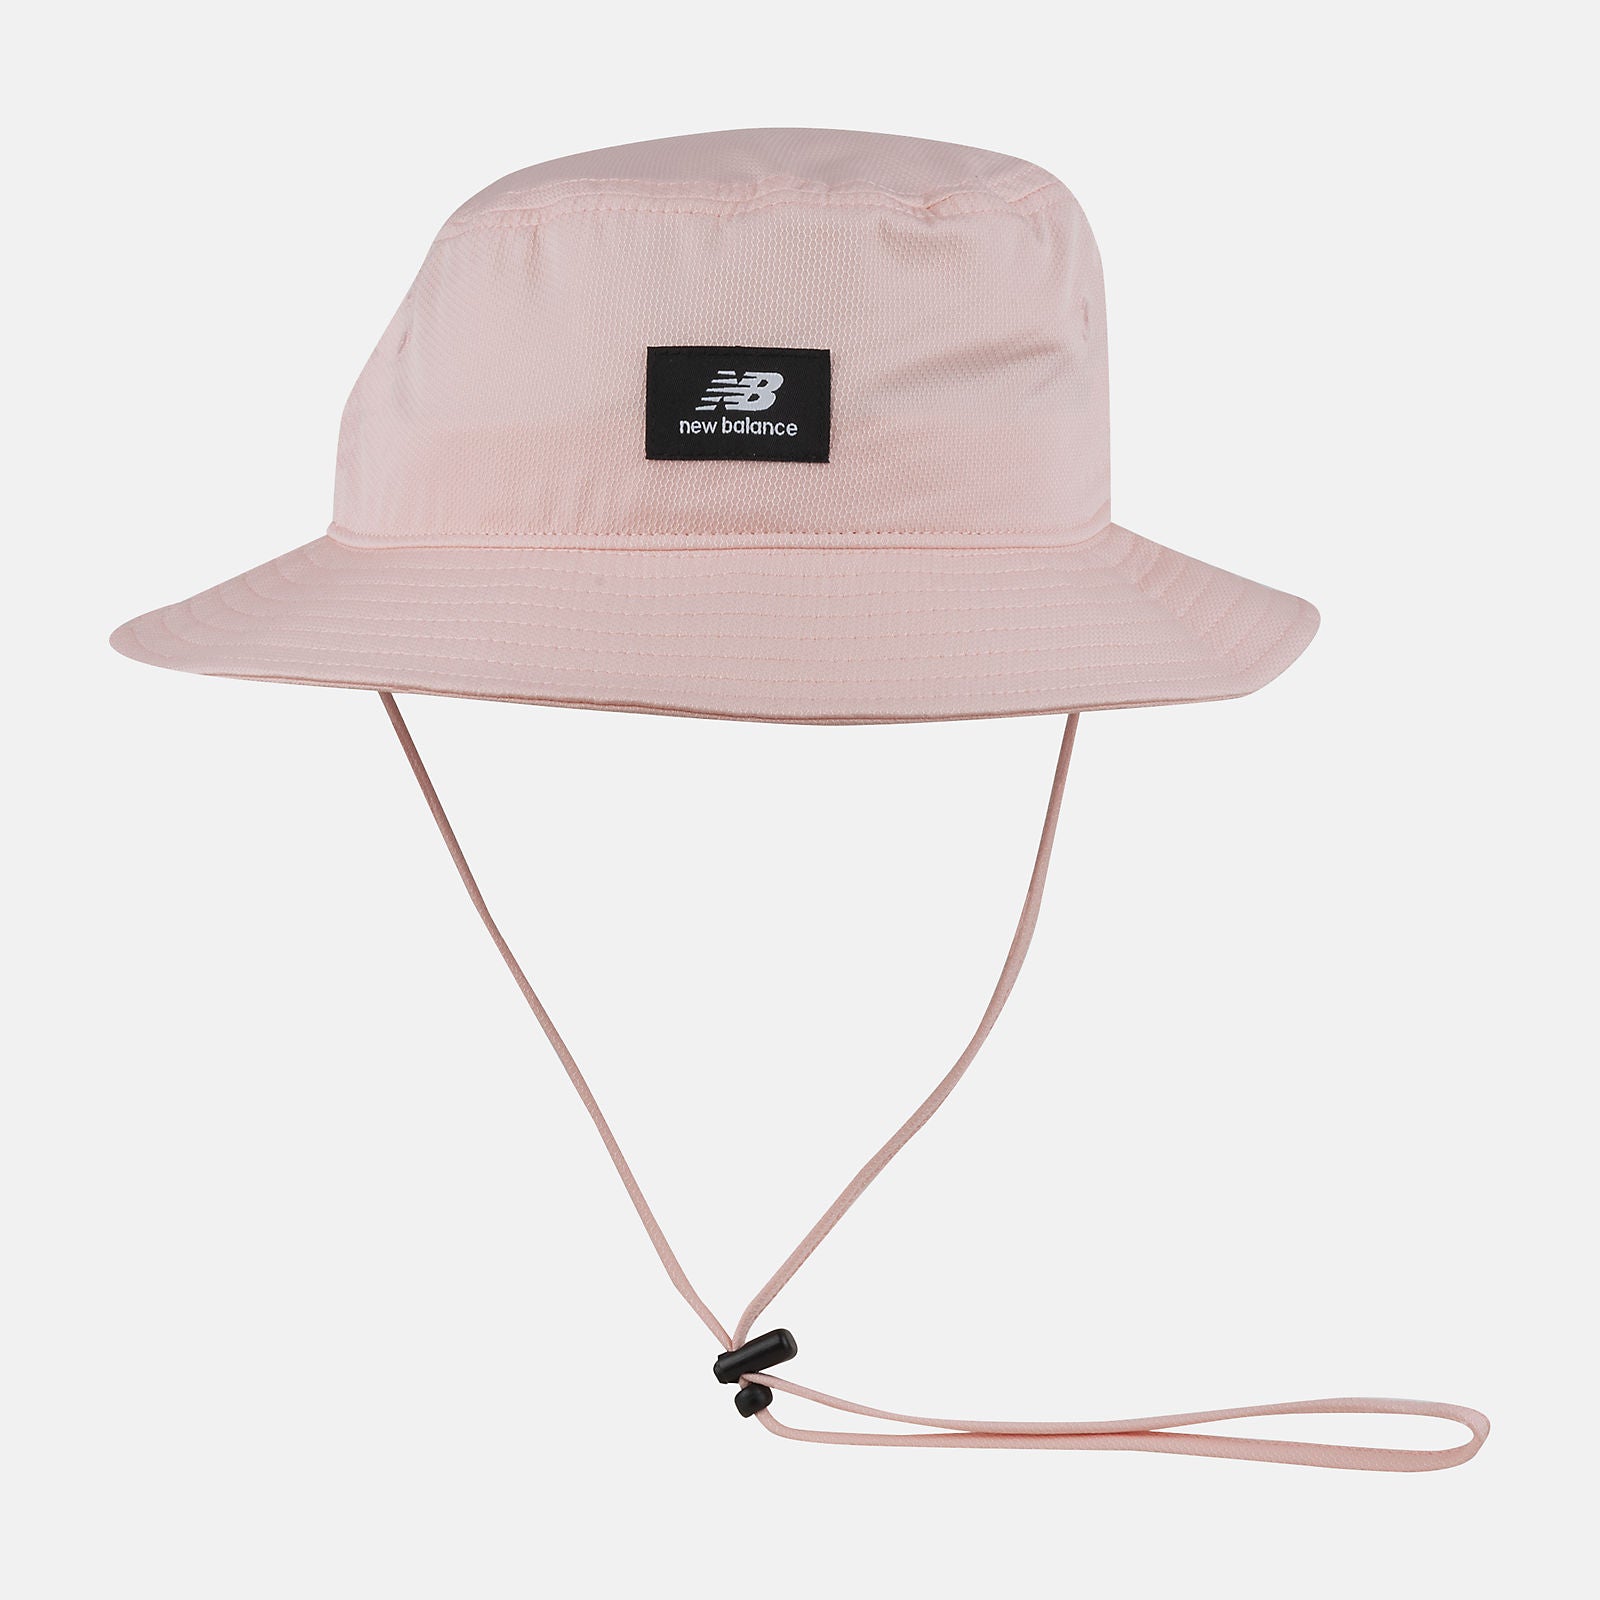 NEW BALANCE Kid's Bucket Hat in Light Pink LAH31007 O/S PINK HAZE FROM EIGHTYWINGOLD - OFFICIAL BRAND PARTNER